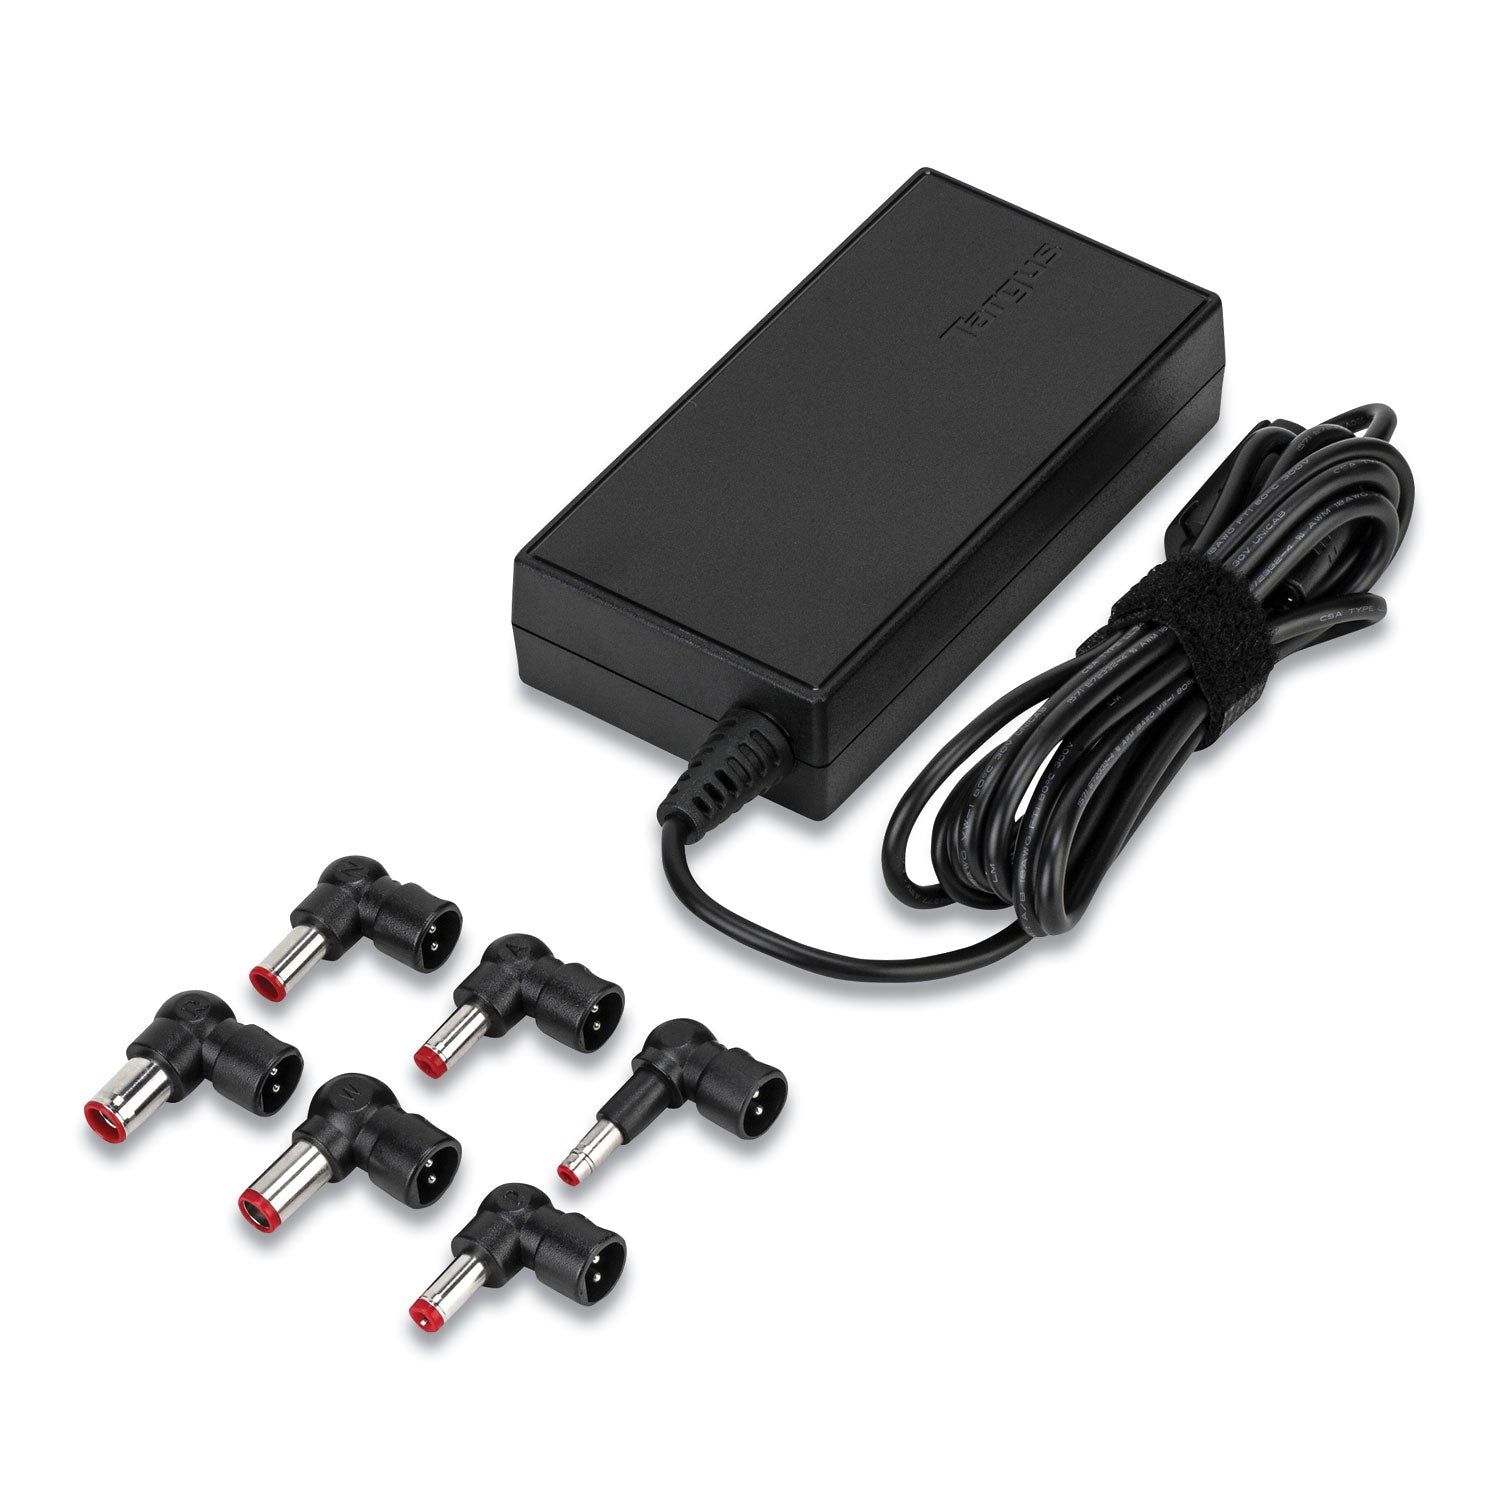 semi-slim-laptop-charger-for-various-devices-90-w-black_trgapa90us - 2